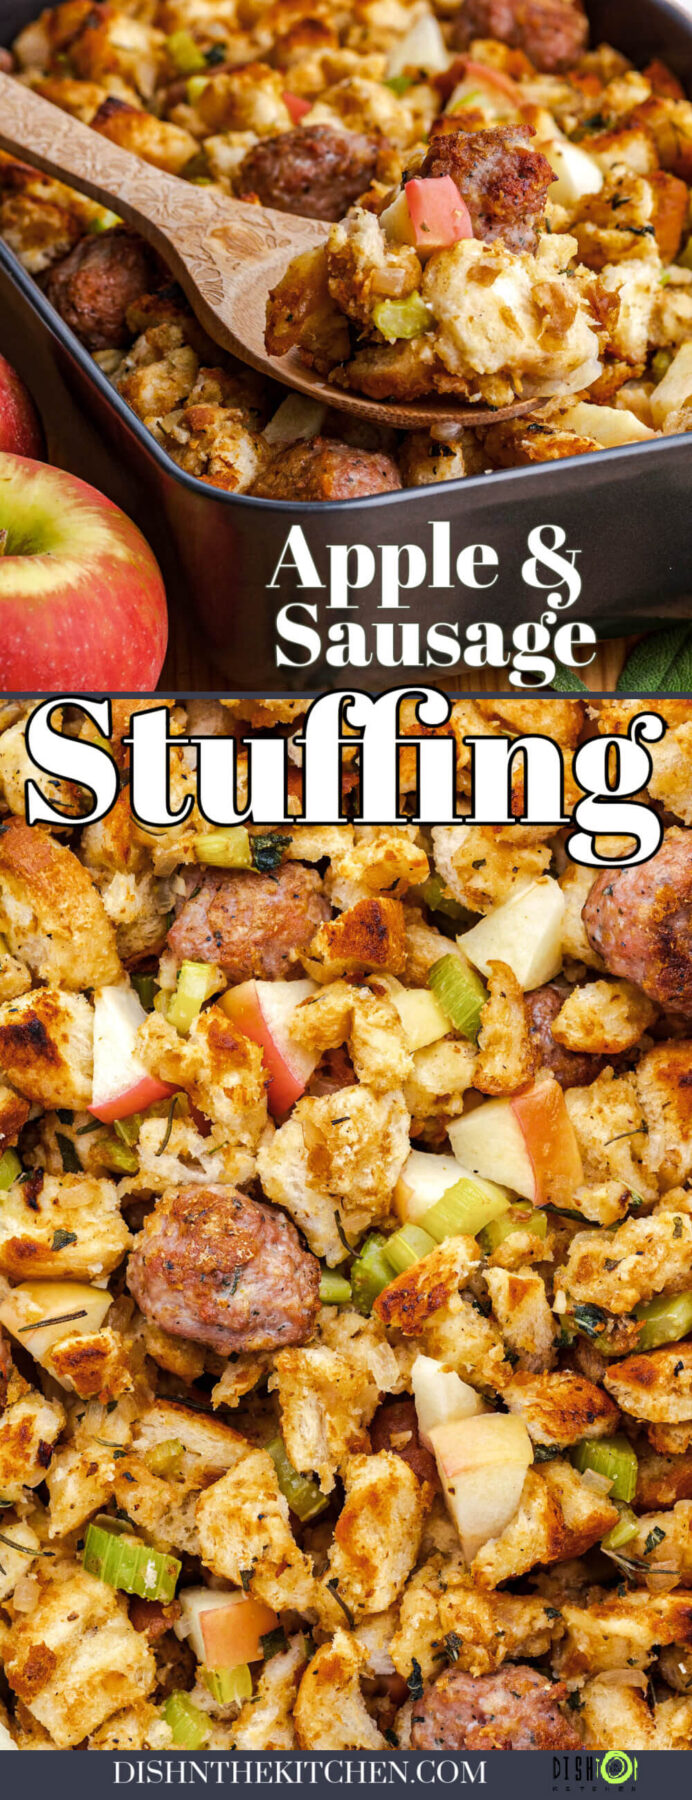 Pinterest image featuring golden baked Apple Sausage Stuffing with celery, onions, and fresh herbs.